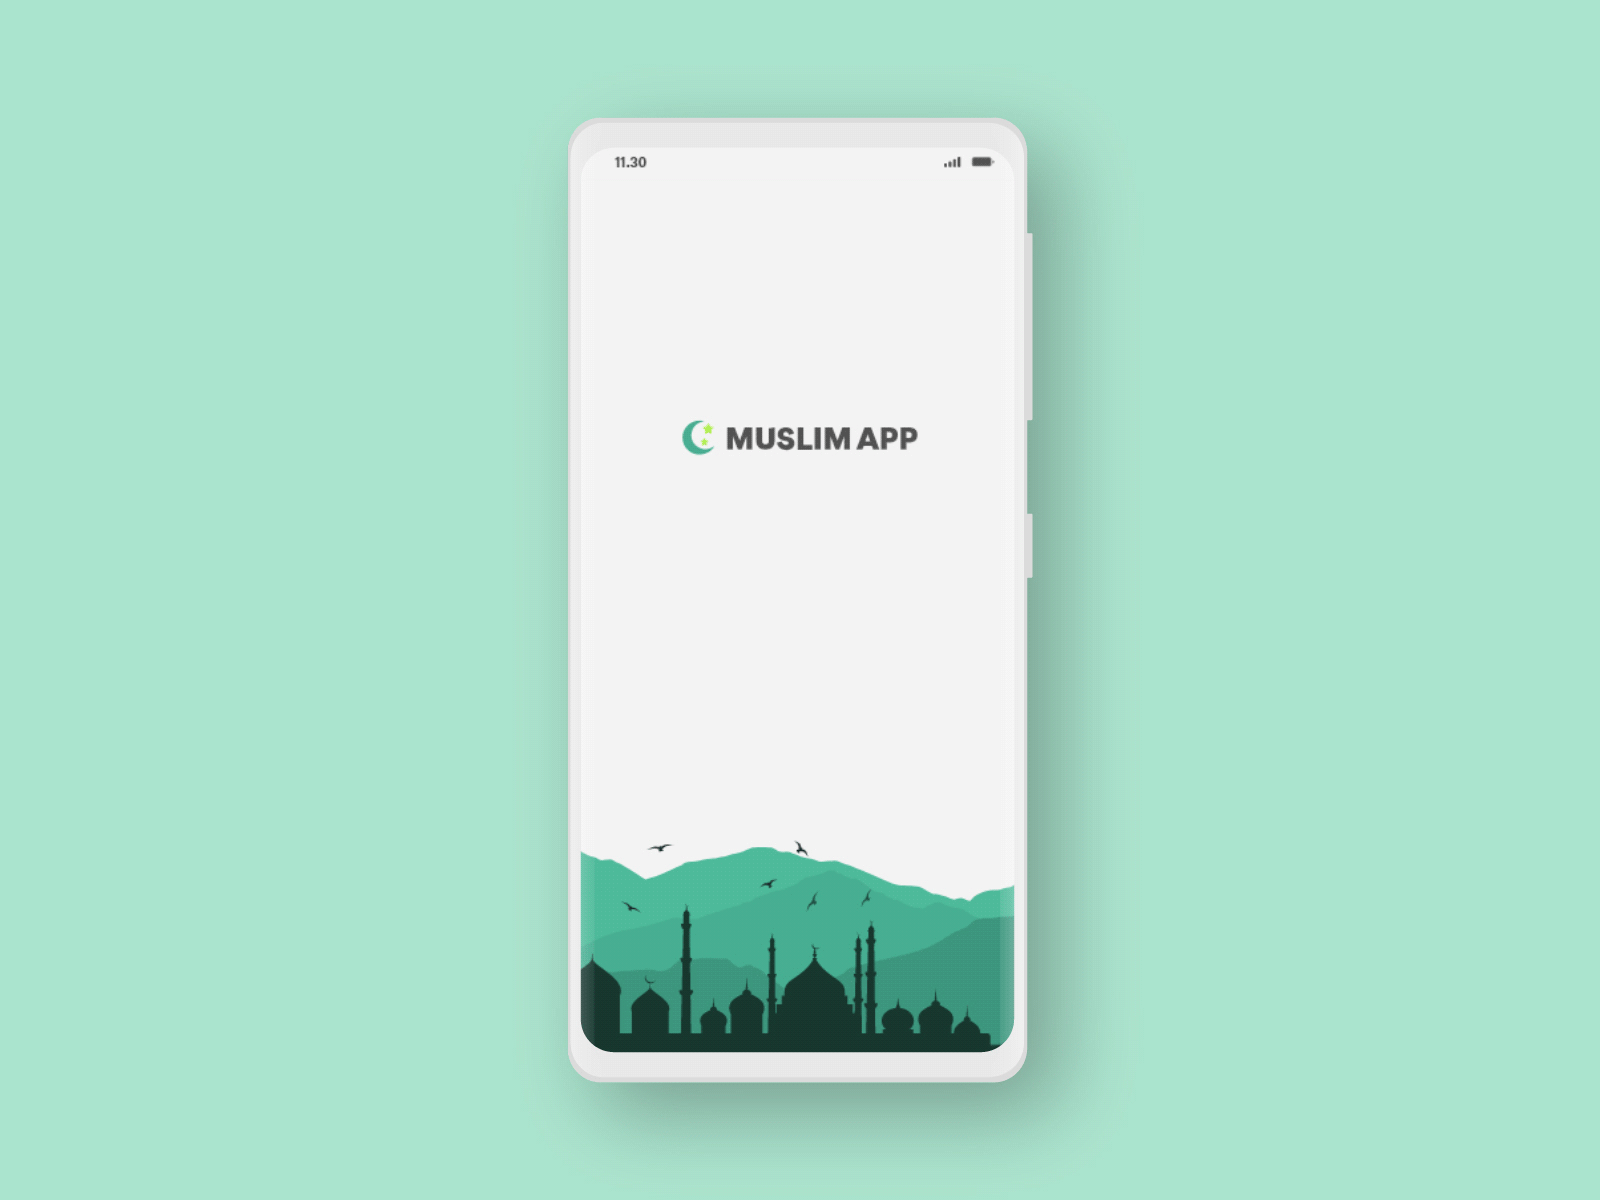 Sign In for Muslim Apps adobexd android interaction design interface sign in ui ux